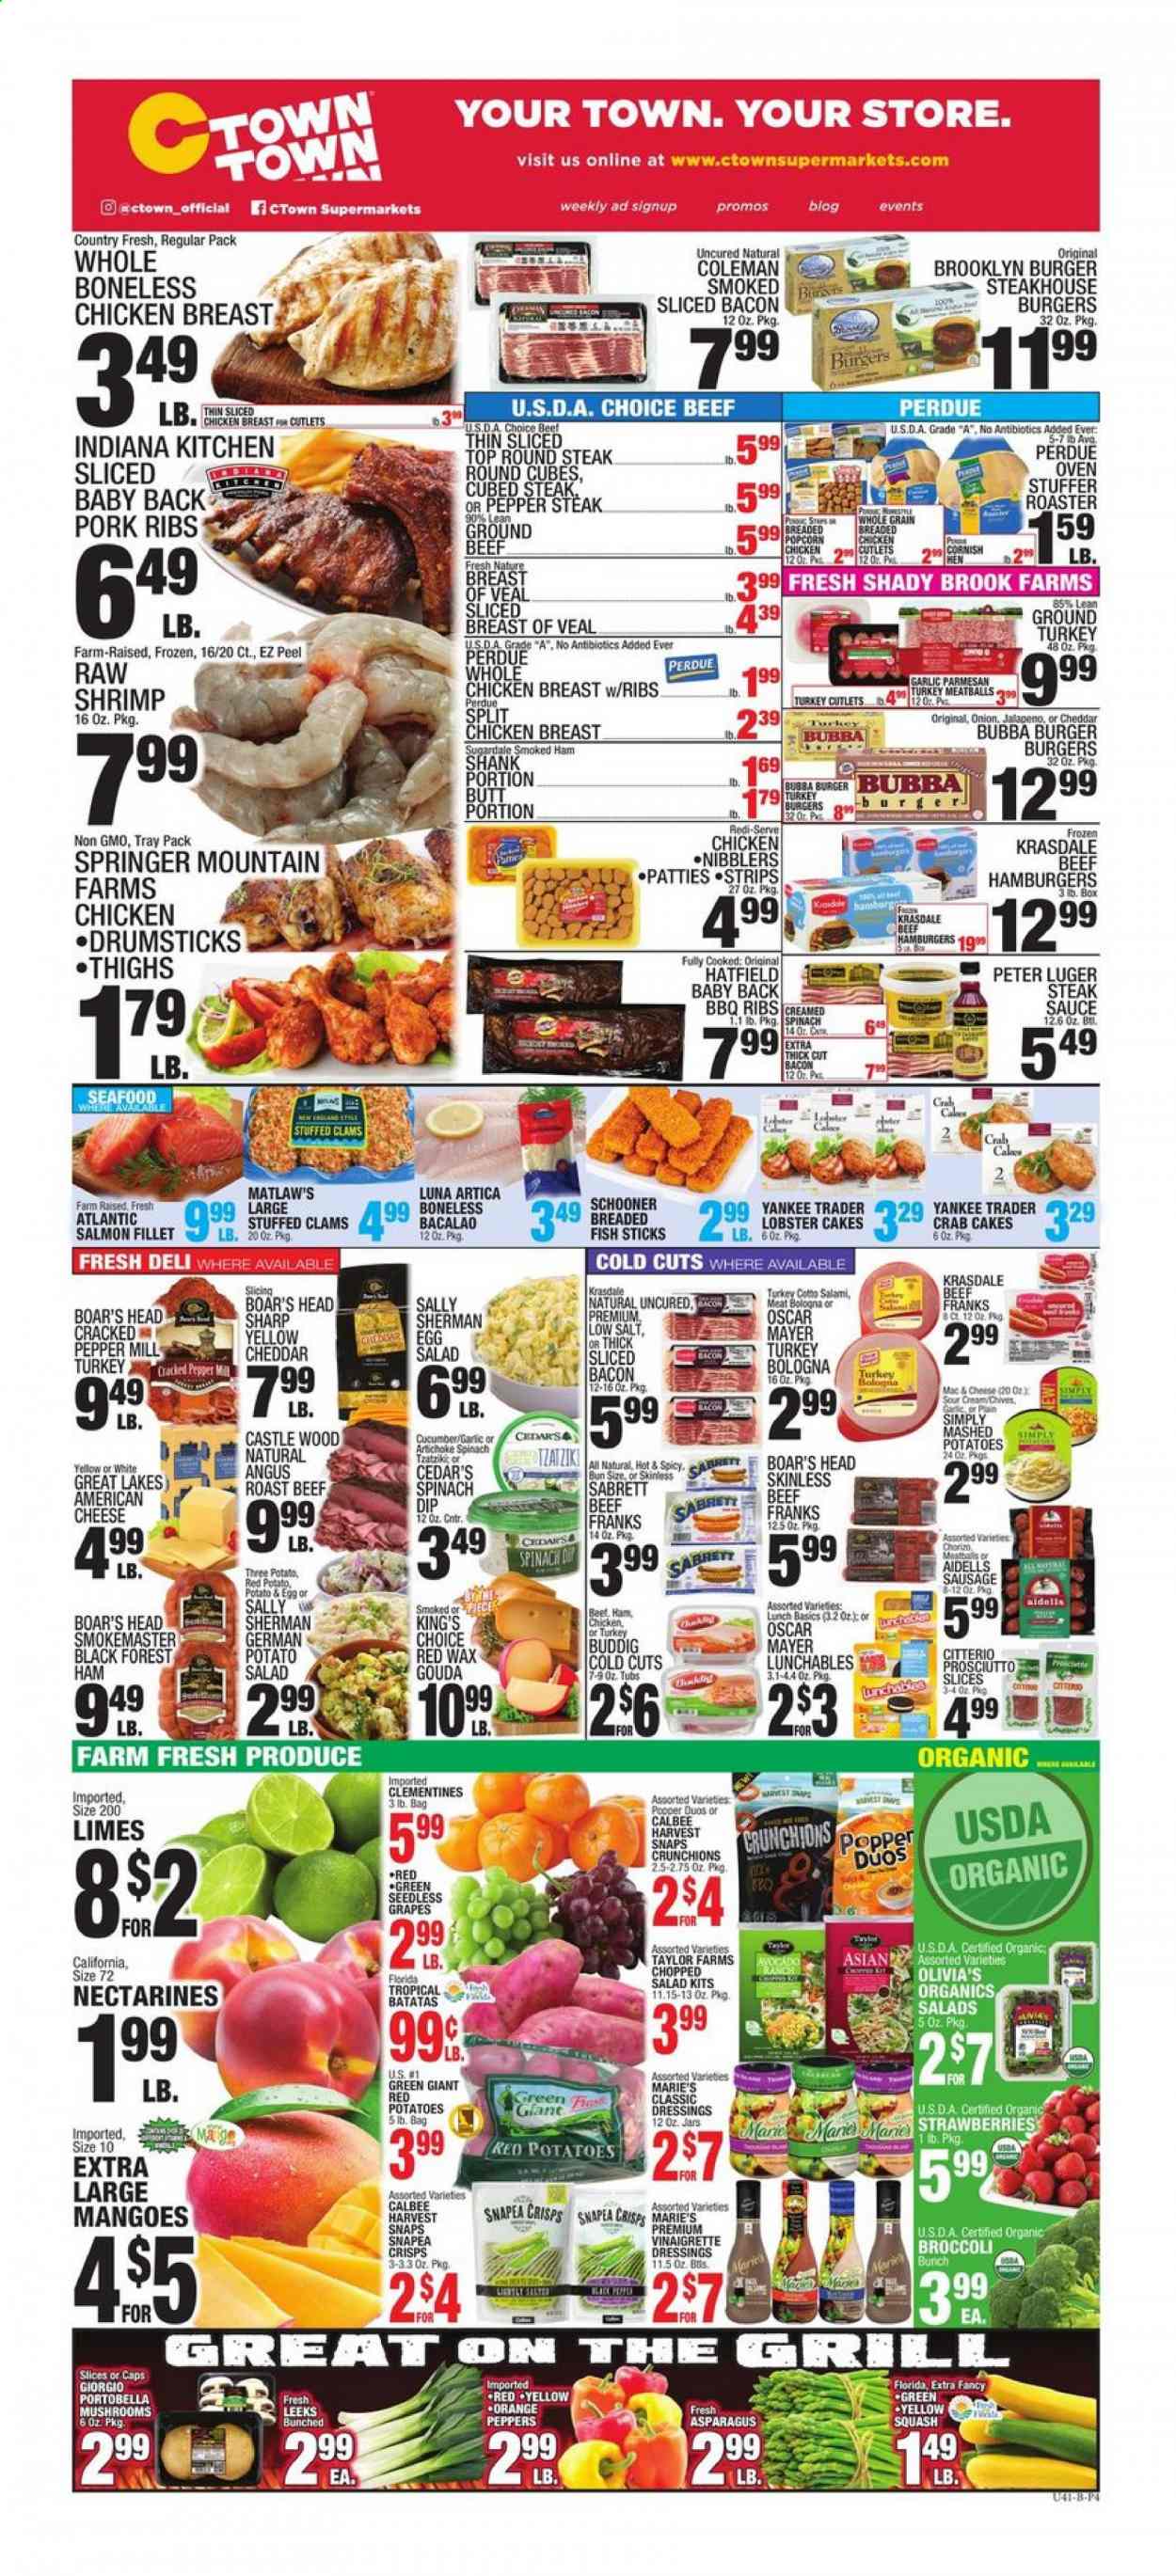 thumbnail - C-Town Flyer - 06/18/2021 - 06/24/2021 - Sales products - mushrooms, seedless grapes, artichoke, asparagus, broccoli, spinach, sweet potato, onion, peppers, jalapeño, red potatoes, yellow squash, chives, avocado, grapes, limes, mango, strawberries, oranges, clams, lobster, salmon, salmon fillet, seafood, fish, shrimps, fish fingers, fish sticks, crab cake, lobster cakes, mashed potatoes, meatballs, sauce, fried chicken, Perdue®, breaded fish, Lunchables, Sugardale, bacon, salami, ham, ham shank, prosciutto, chorizo, smoked ham, Oscar Mayer, sausage, tzatziki, potato salad, american cheese, gouda, eggs, sour cream, dip, spinach dip, strips, popcorn, Harvest Snaps, steak sauce, vinaigrette dressing, beer, Castle, cornish hen, ground turkey, whole chicken, chicken drumsticks, beef meat, ground beef, steak, round steak, roast beef, turkey burger, pork meat, pork ribs, pork back ribs, clementines, nectarines. Page 4.